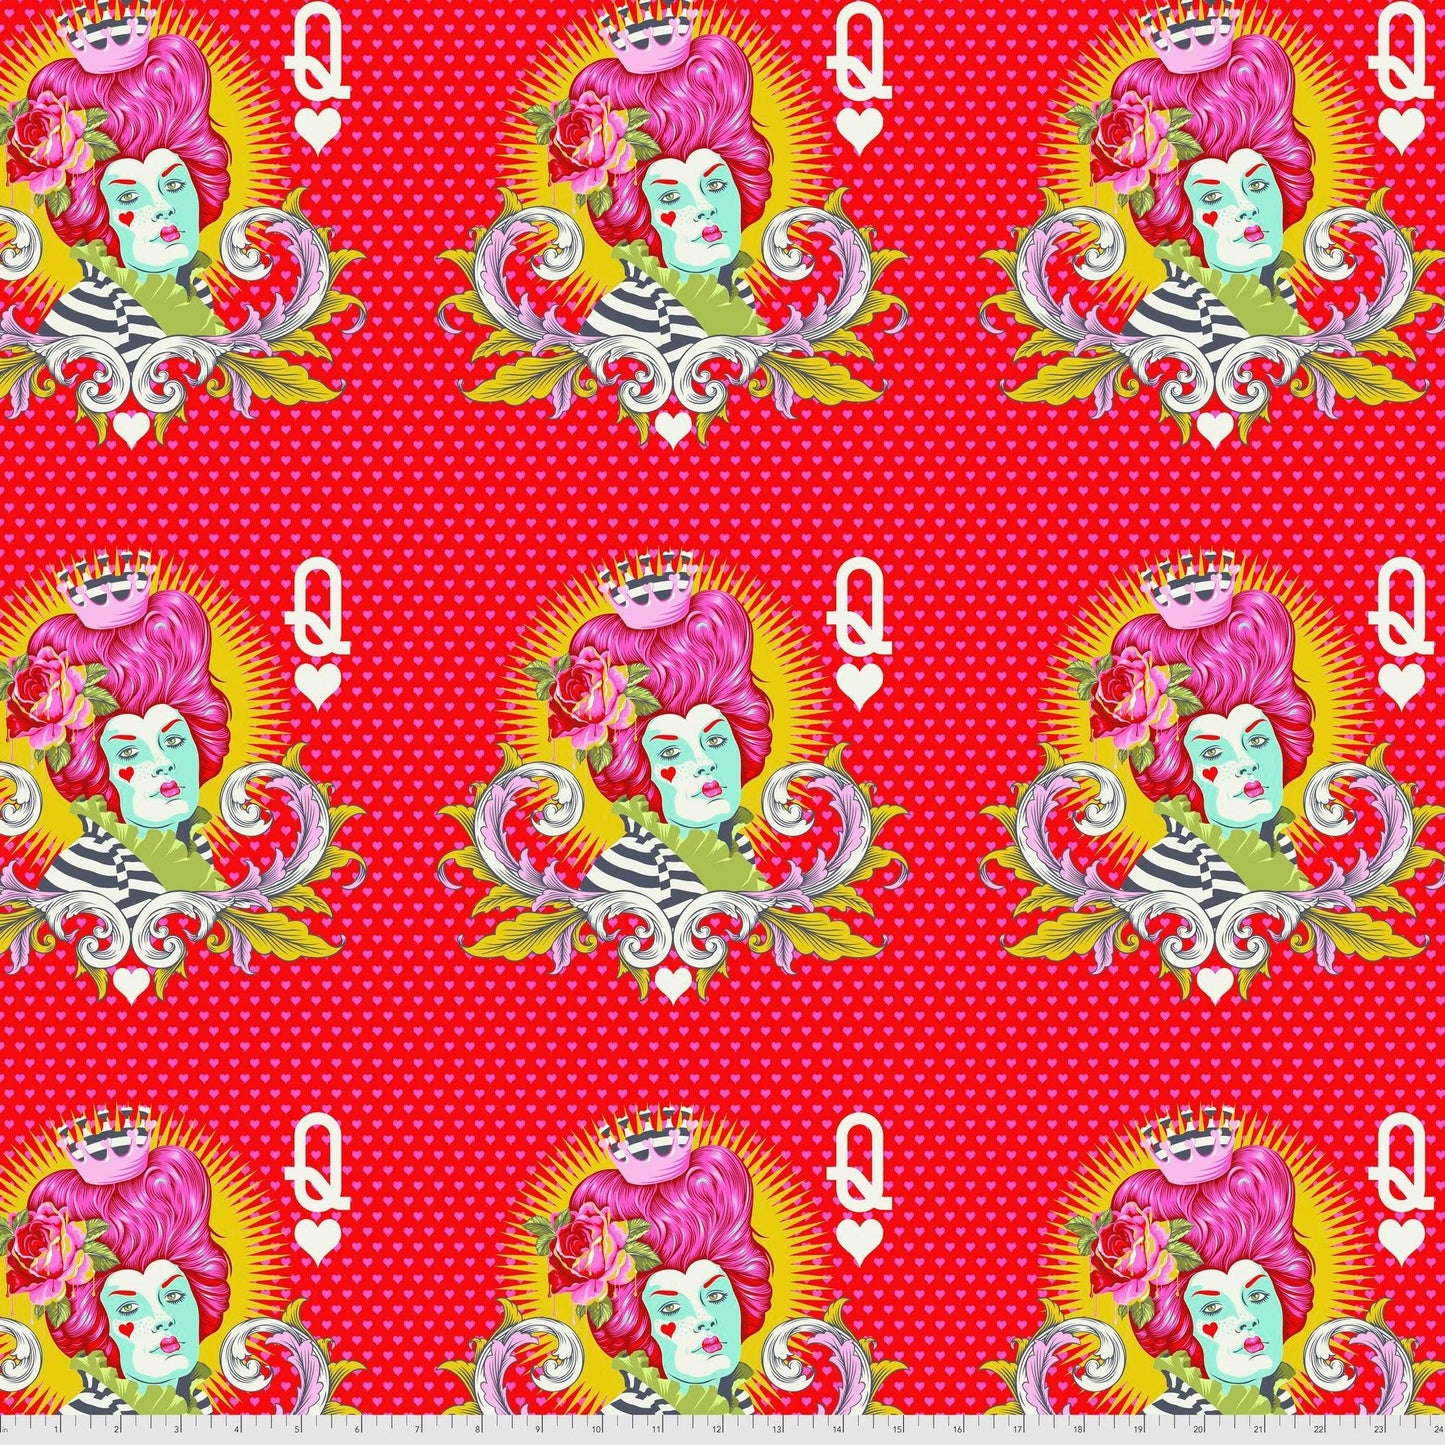 Tula Pink CURIOUSER & CURIOUSER The Red Queen in Wonder, PWTP160, Quilt Fabric, Cotton Fabric, Alice in Wonderland, Fabric By The Yard